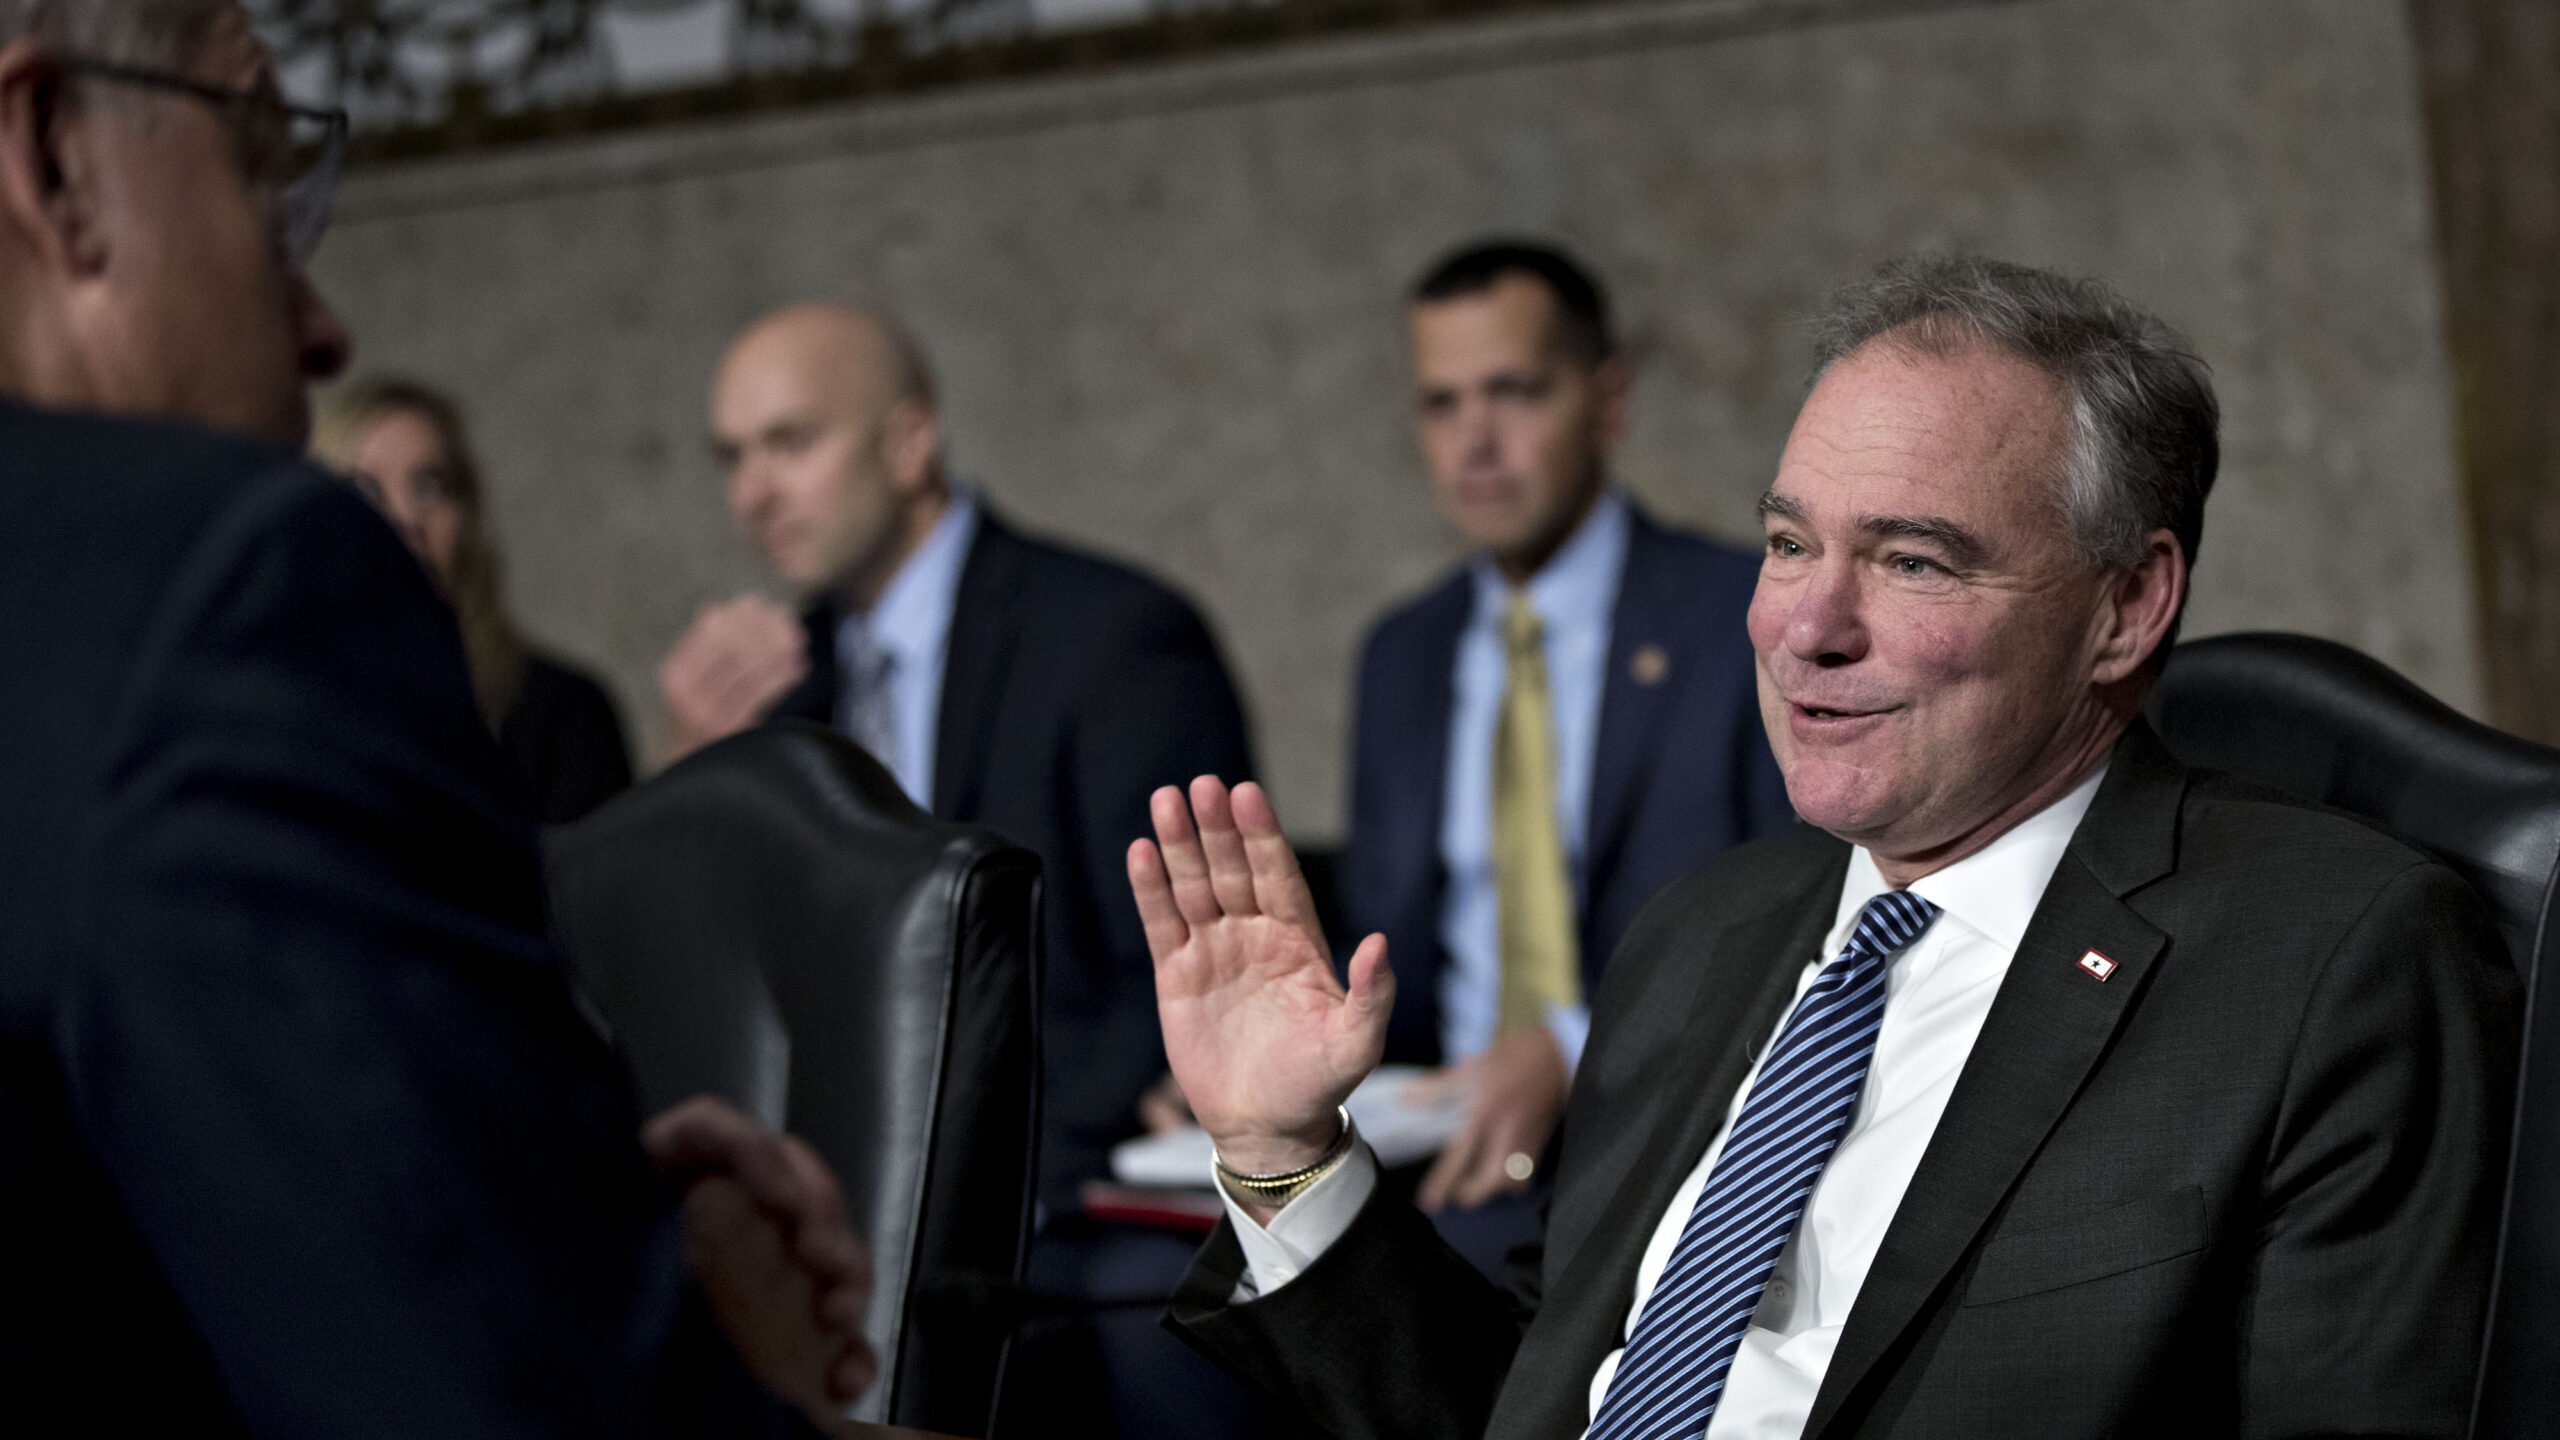 With ‘robust’ waiver, Kaine says ‘Buy America’ requirements won’t hamstring Navy shipbuilding